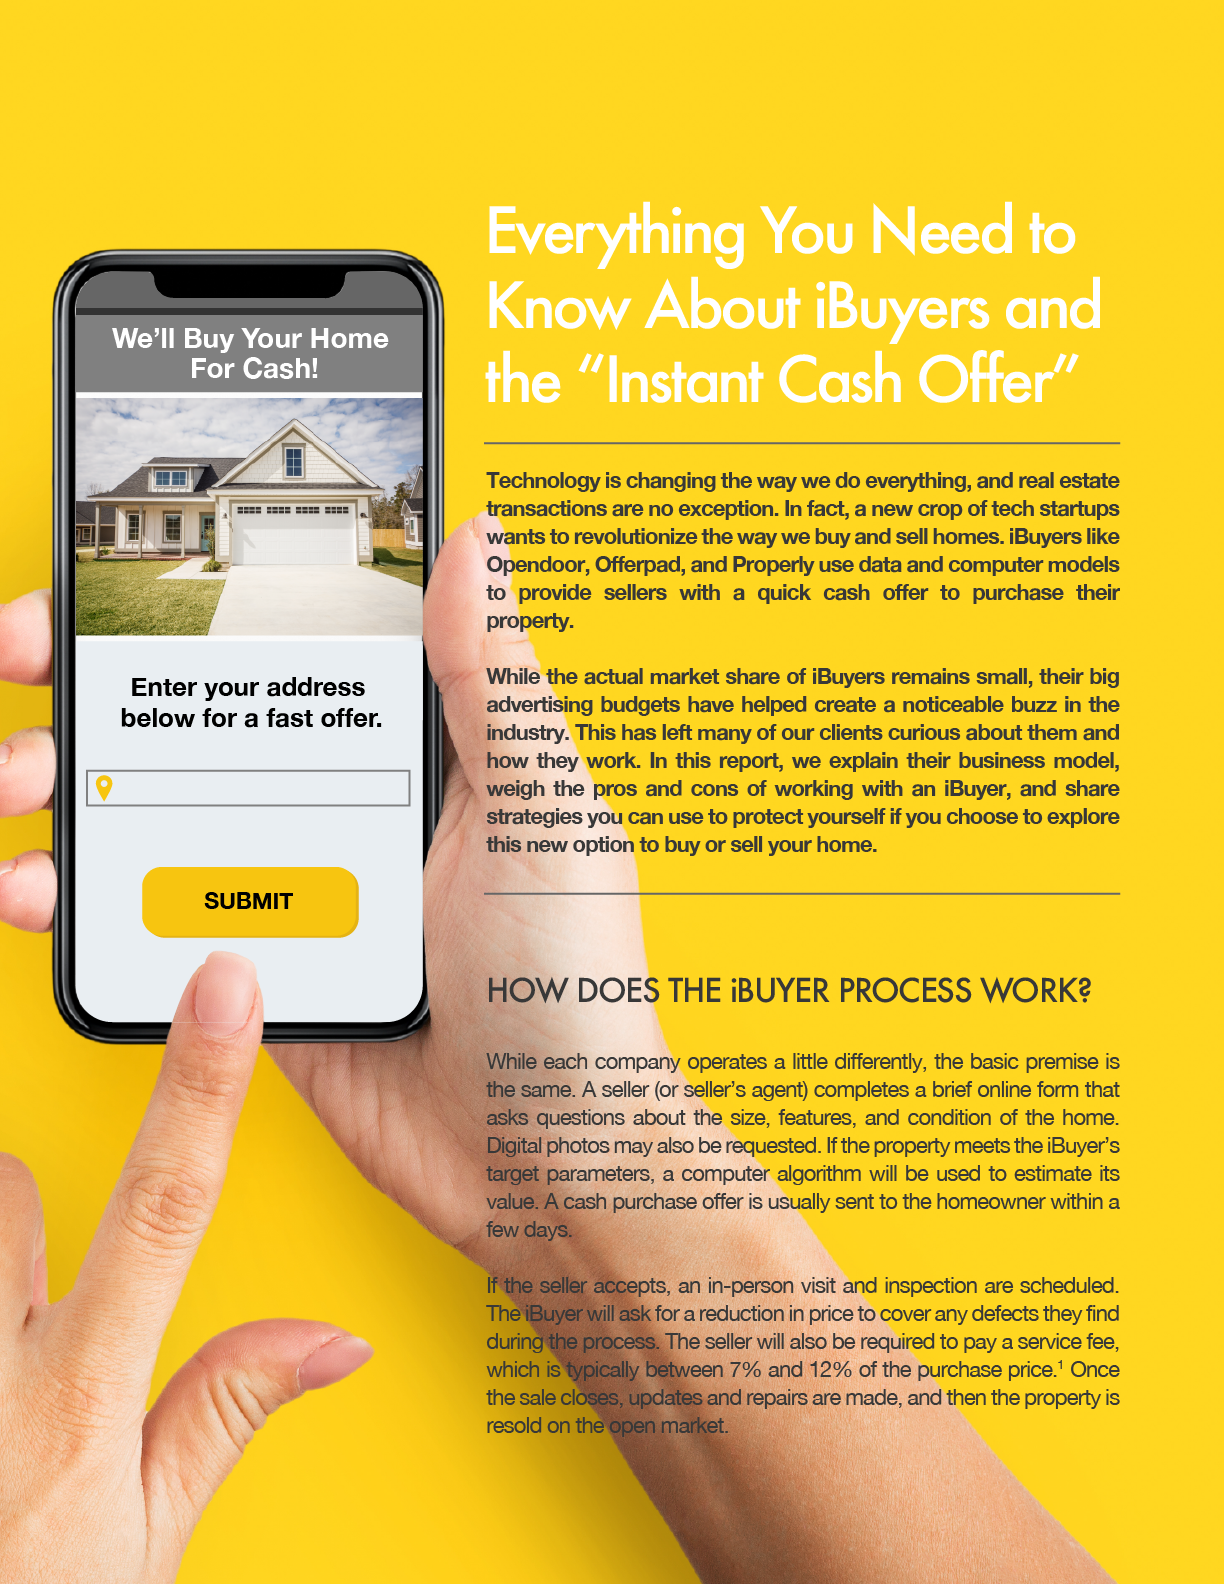 Everything You Need to Know About iBuyers and the "Instant Cash Offer"